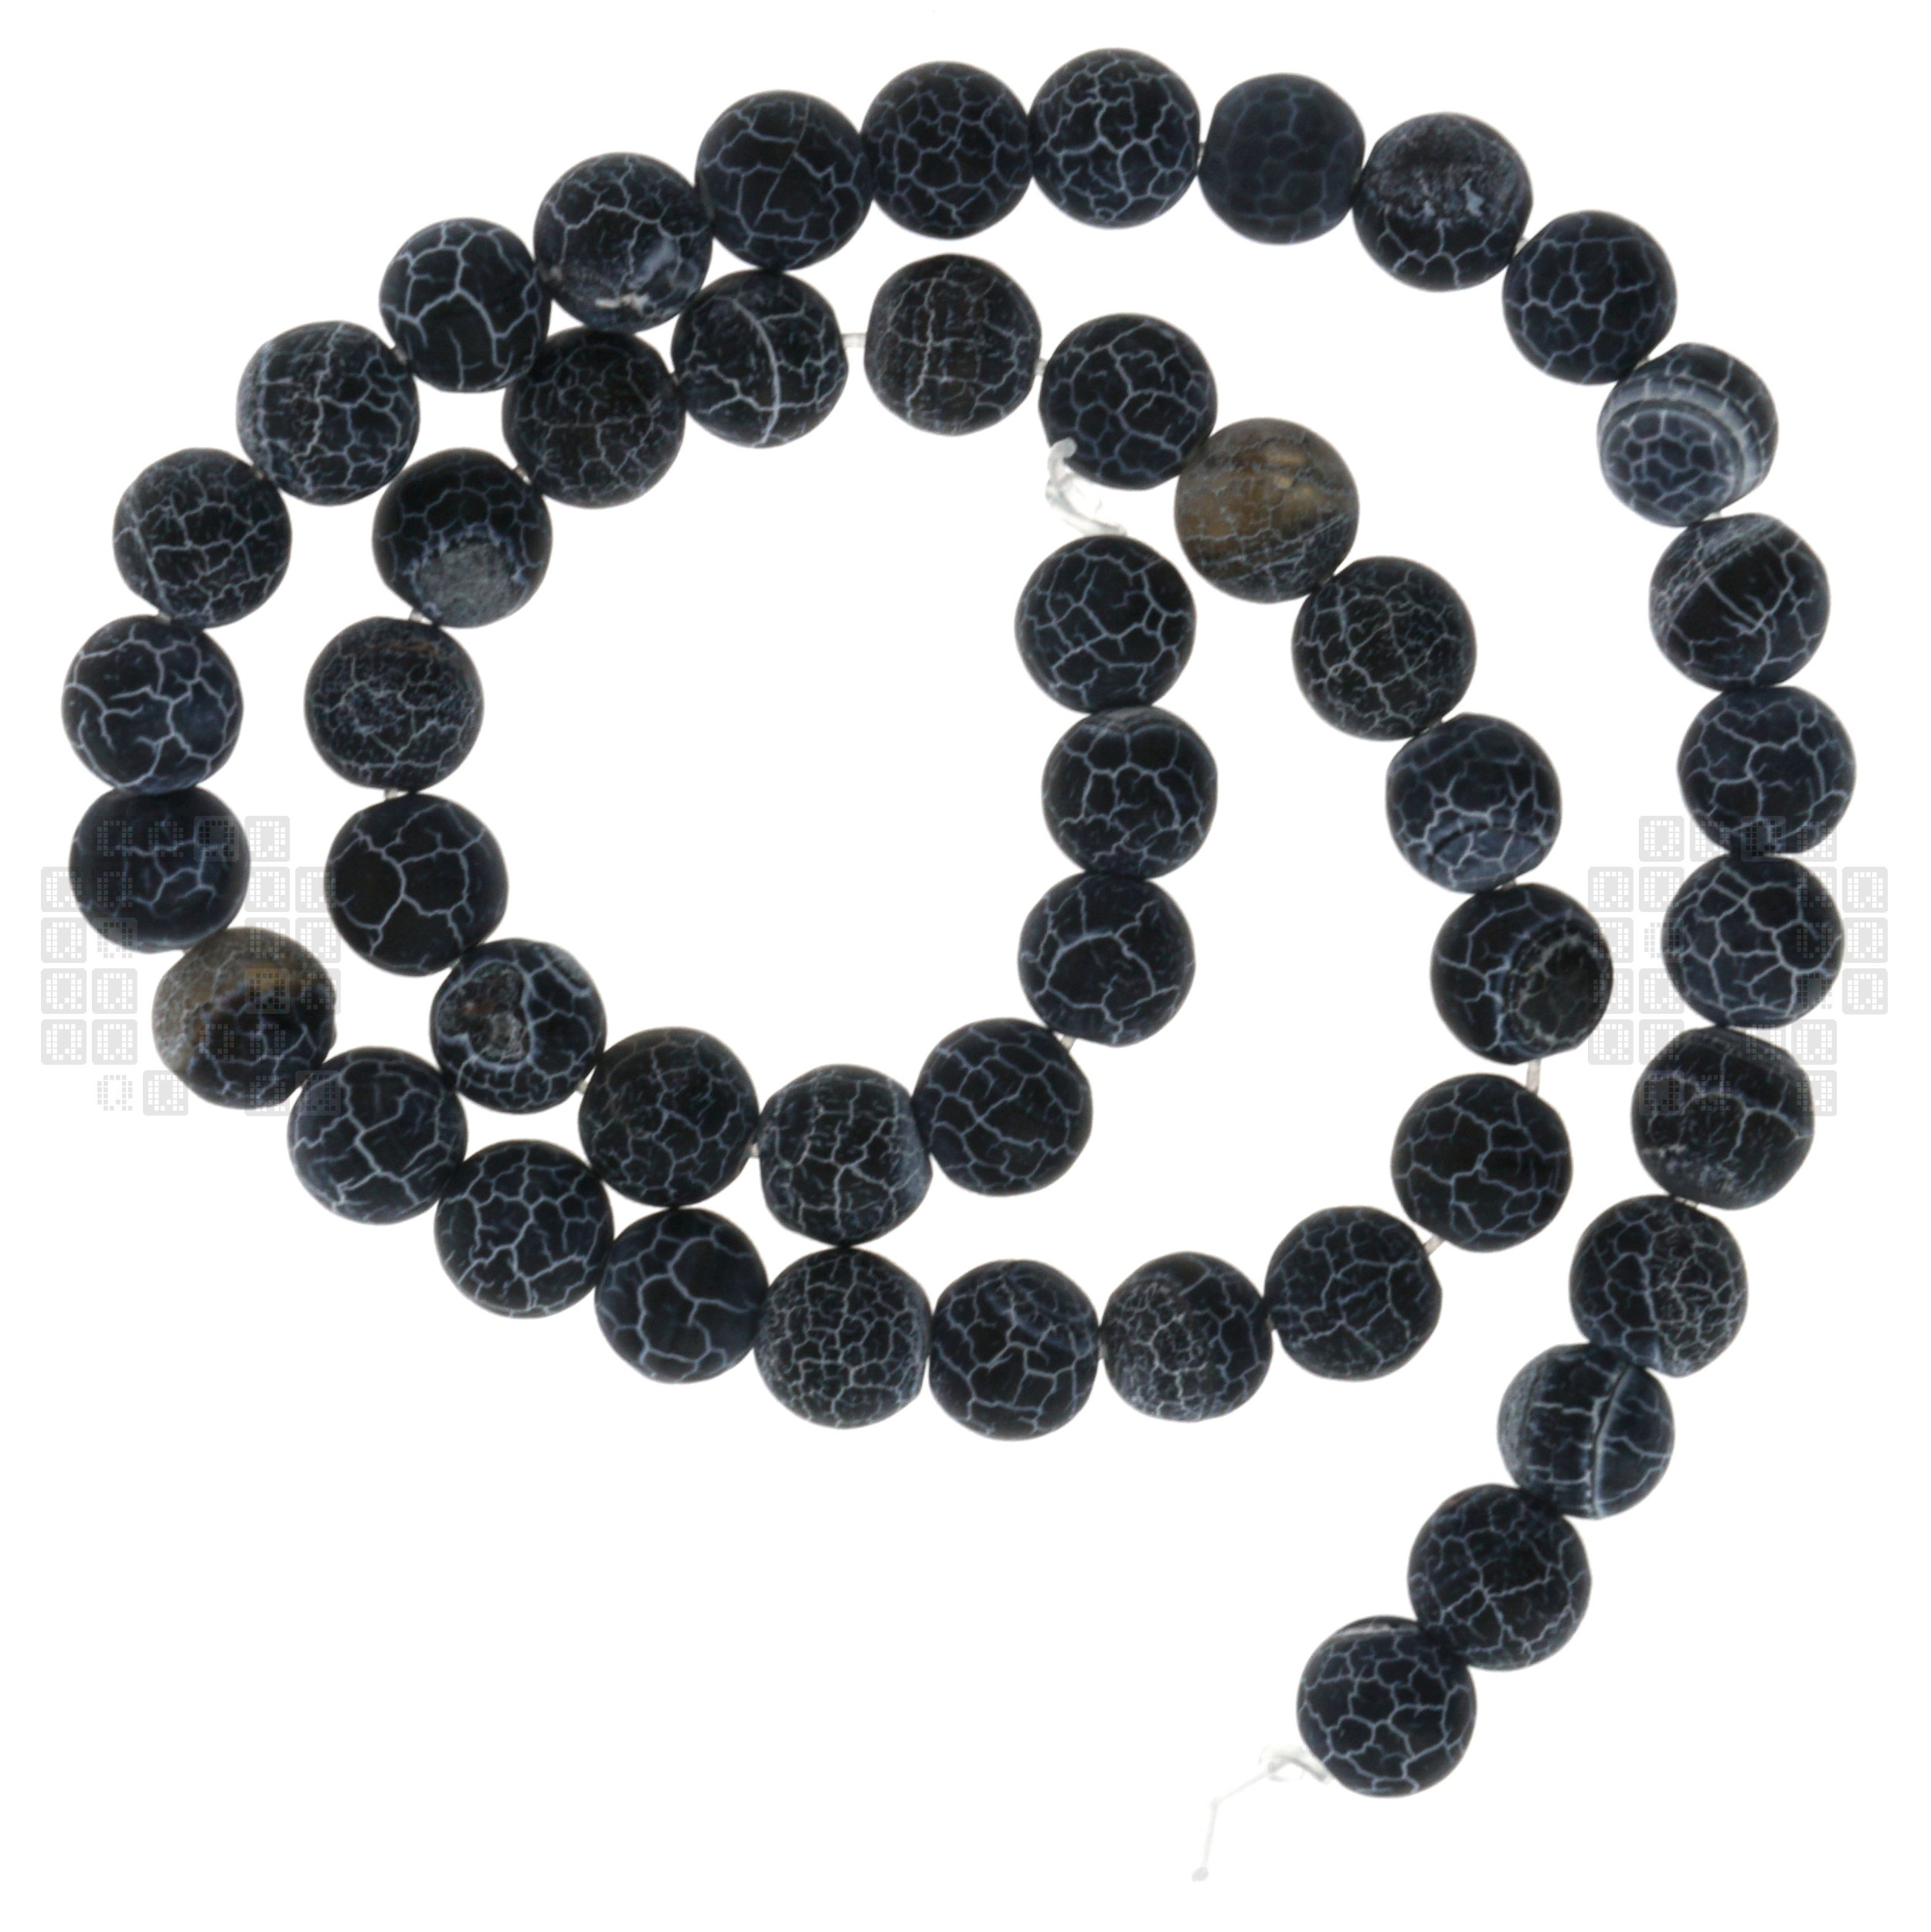 Black Frost Cracked Agate 8mm Round Beads, 45 Pieces